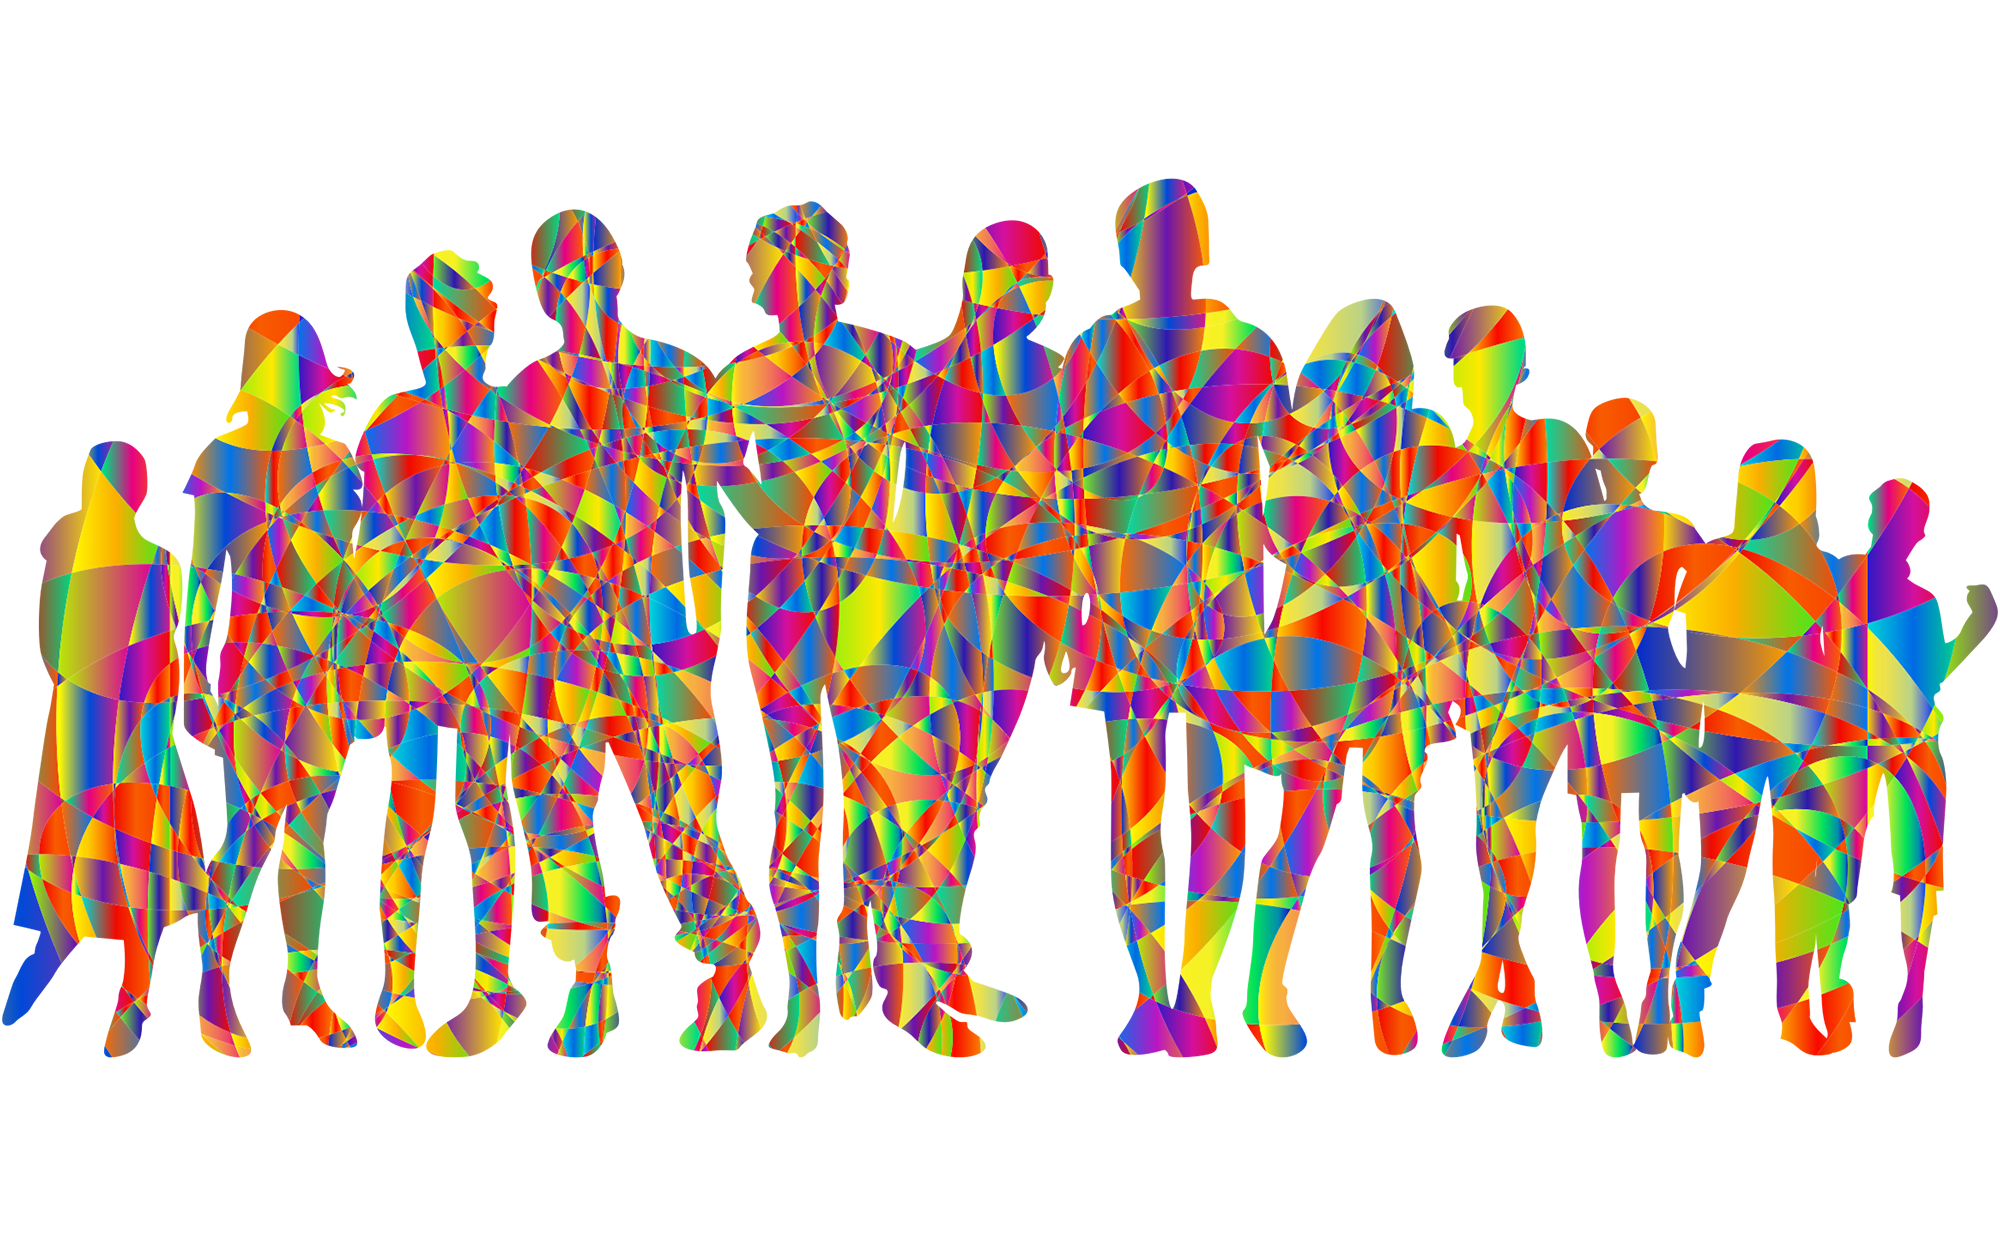 A group of human silhouettes rendered in abstract tesselated colors